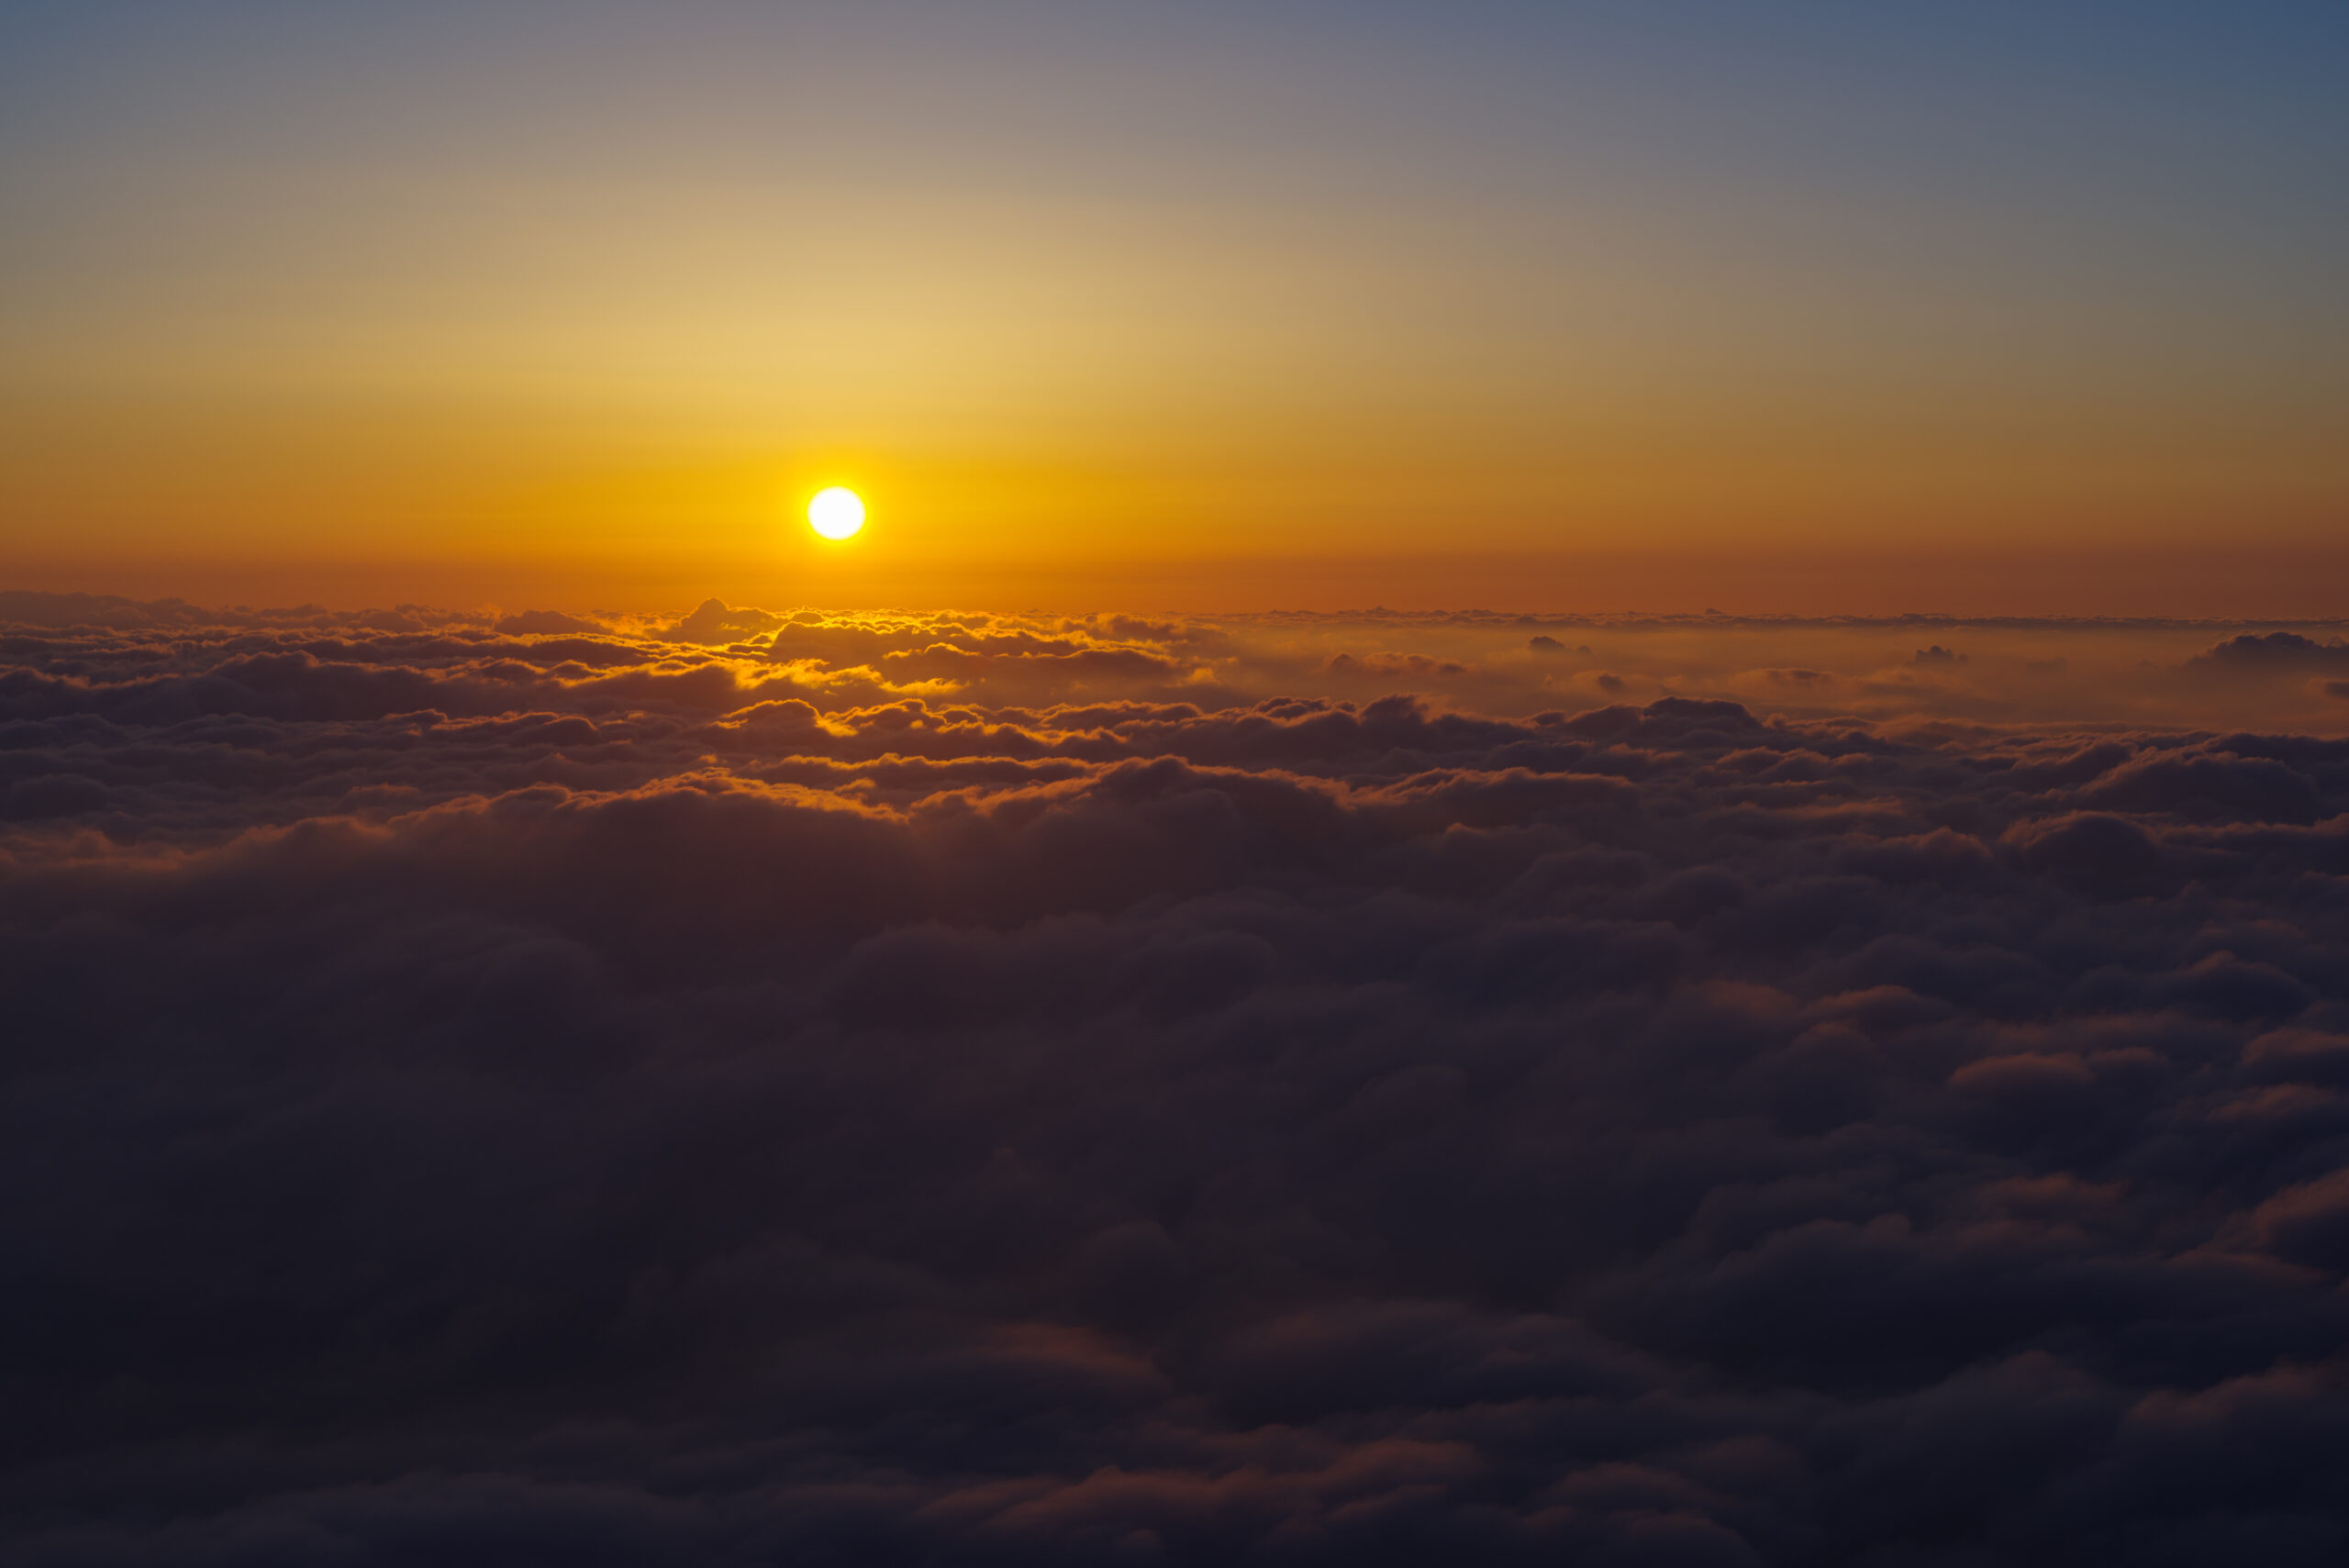 Sunrise from above the skies